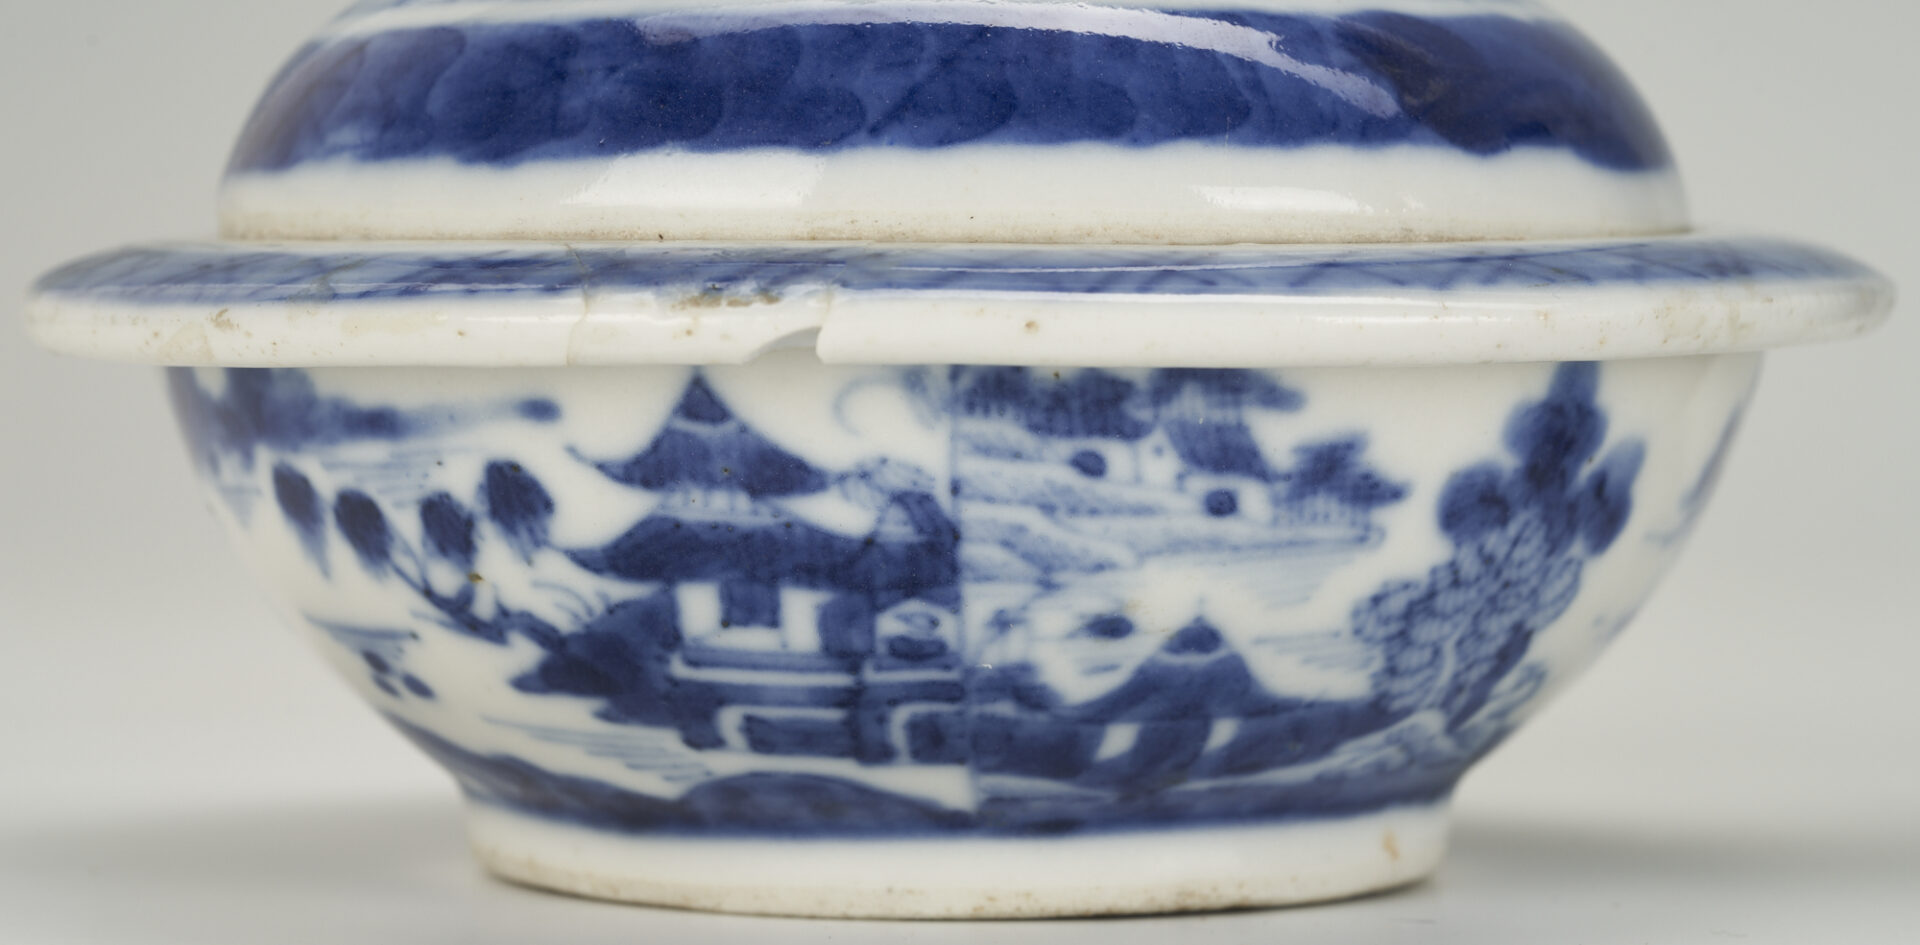 Lot 869: 12 Assorted Chinese Export Canton Porcelain Items, incl. Chestnut Basket & Teapots